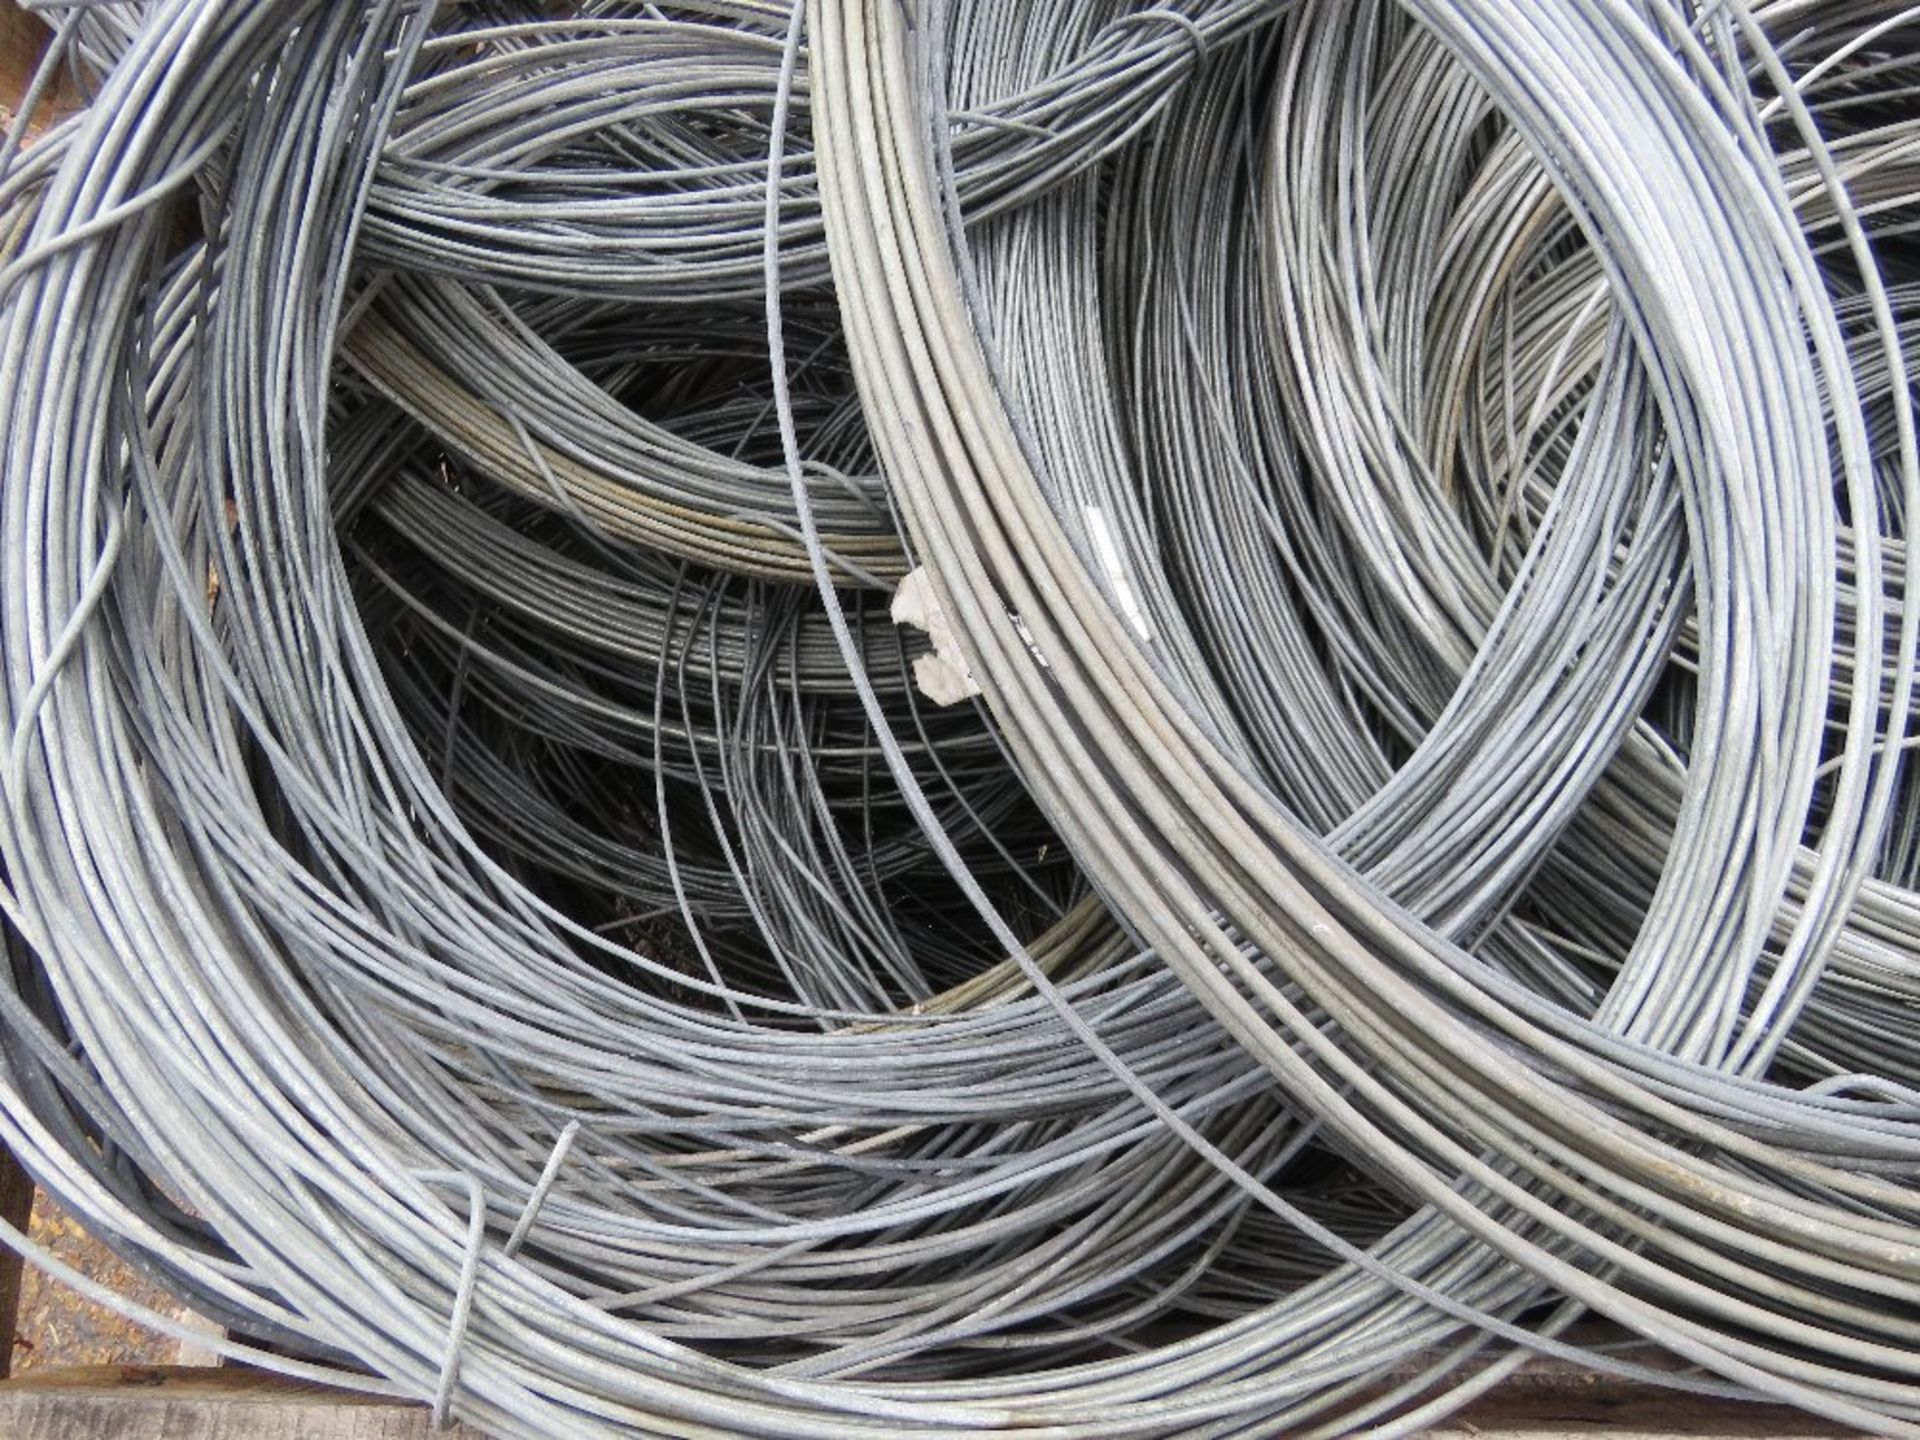 ASSORTED GALVANISED FENCING WIRE 2.5/3.5MM. - Image 4 of 6